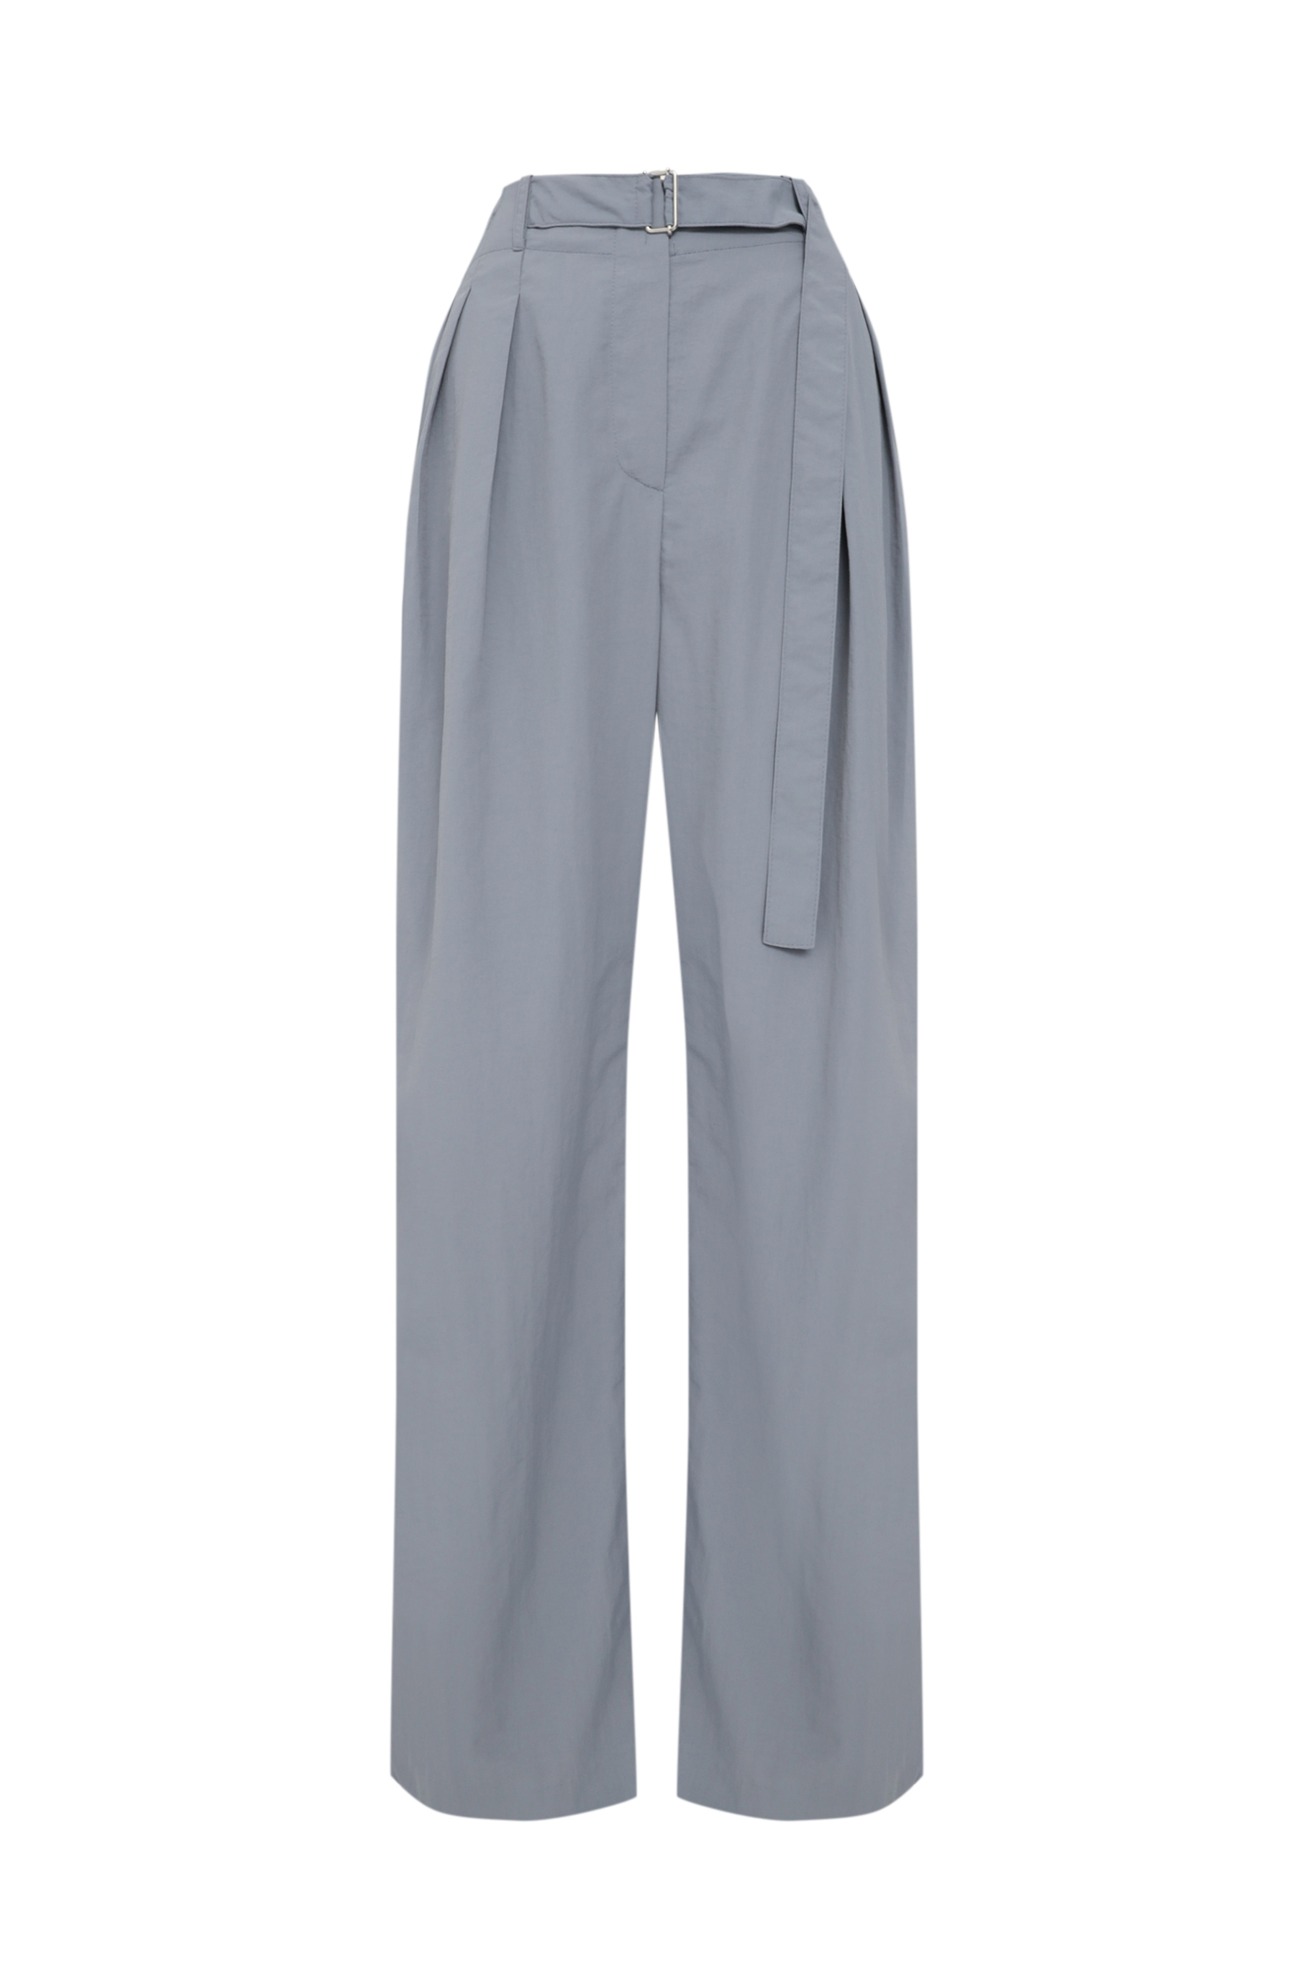 Double Pleats Belted Trousers  5/26일 순차발송